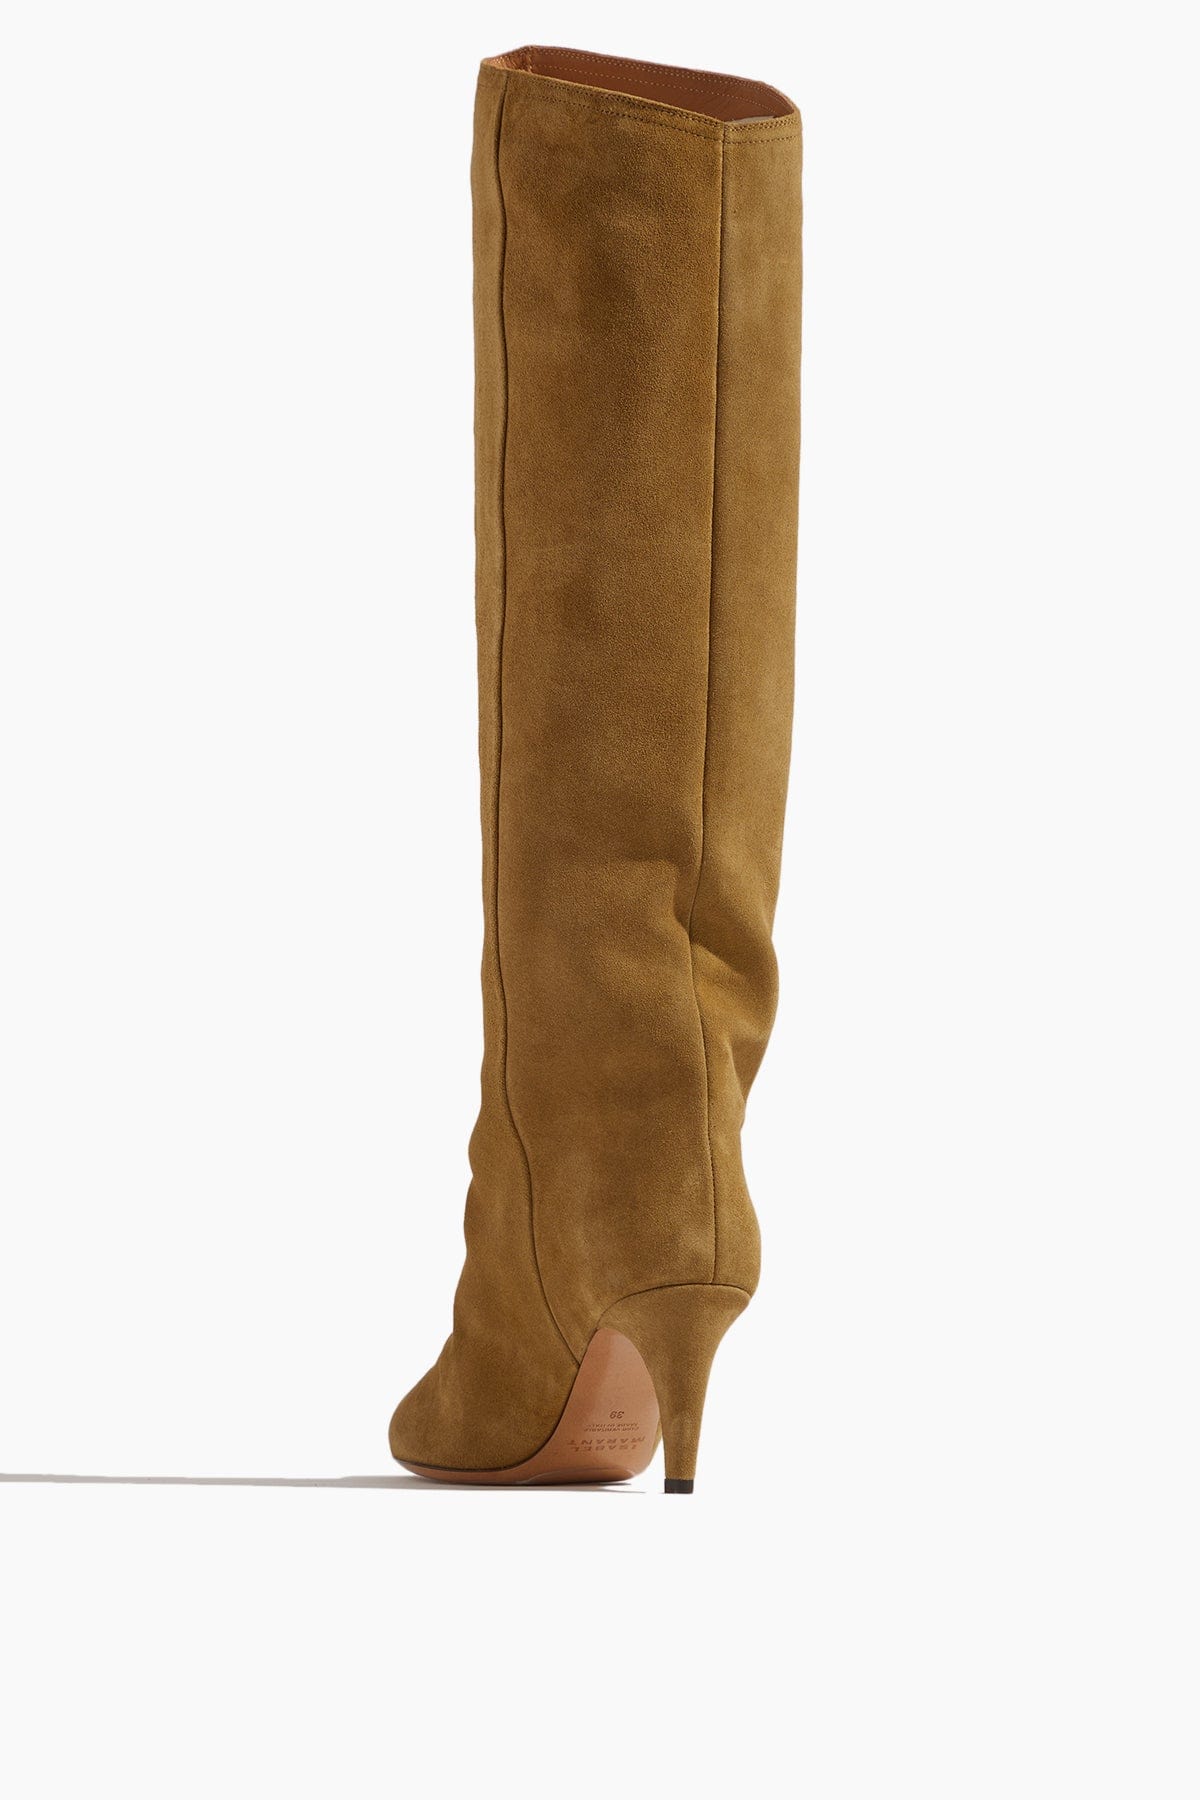 Isabel Marant Shoes Tall Boots Lispa Boot in Taupe Isabel Marant Lispa Boot in Taupe